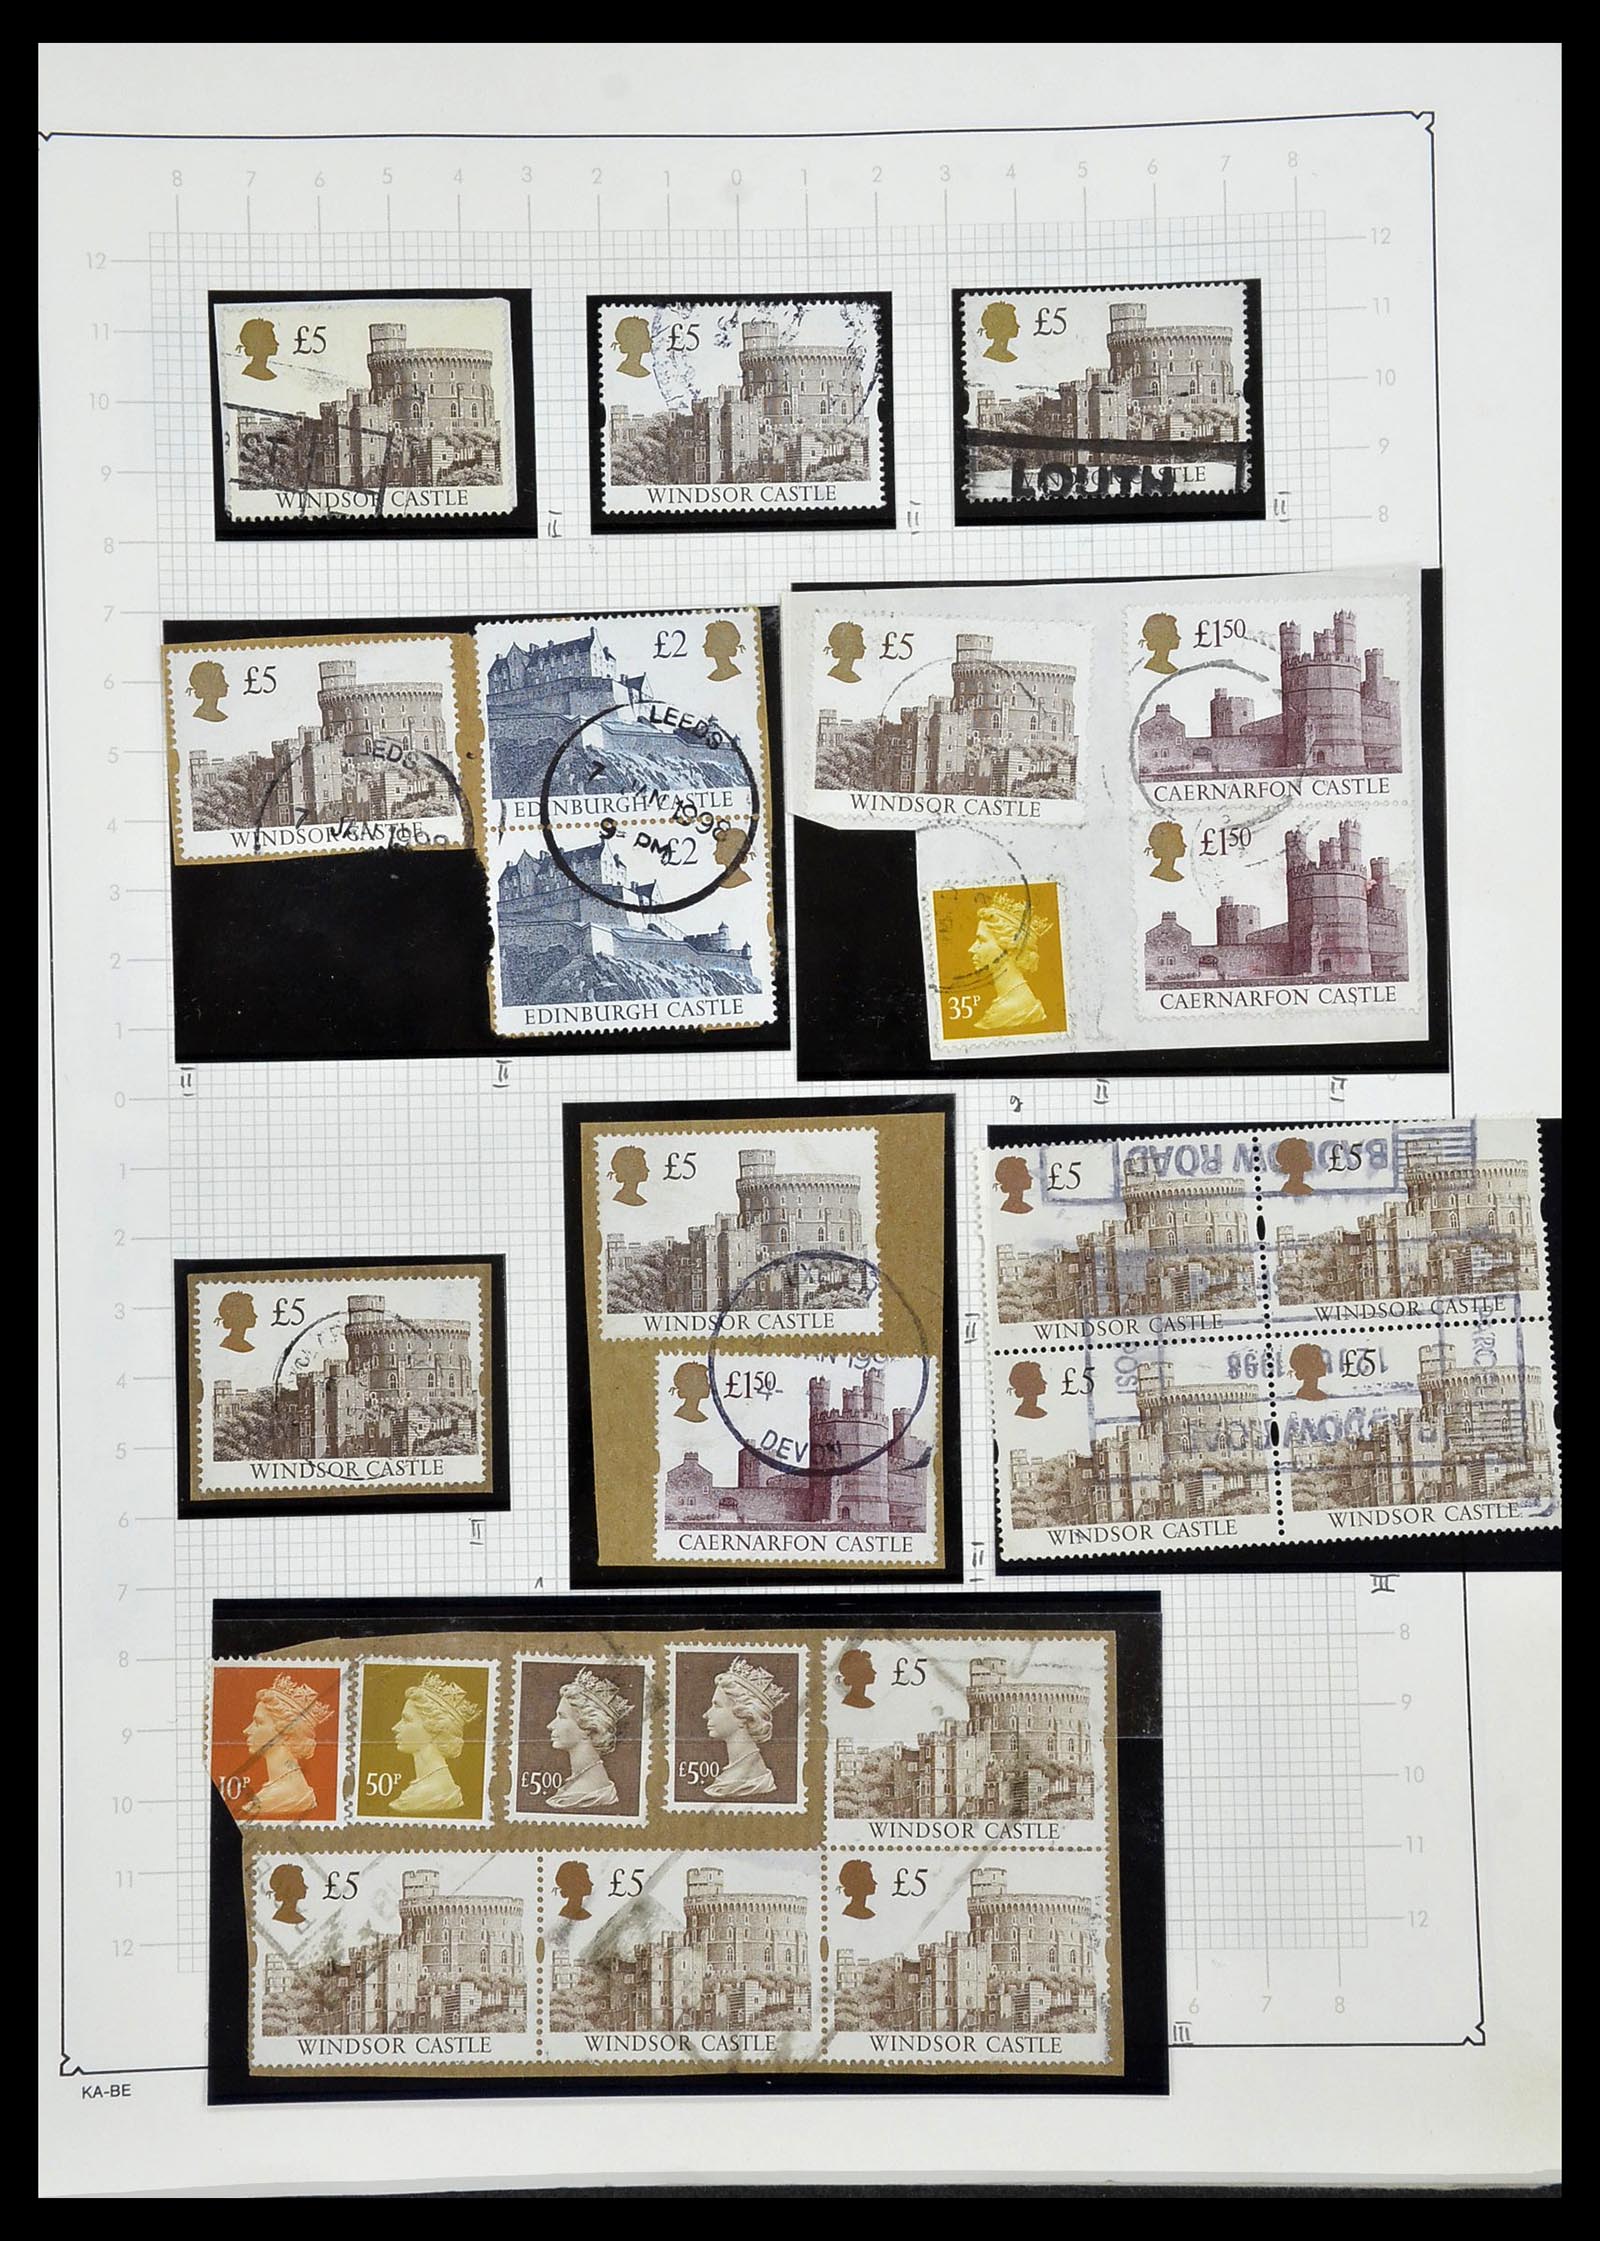 34221 174 - Stamp collection 34221 Great Britain Machins/castles 1971-2005.